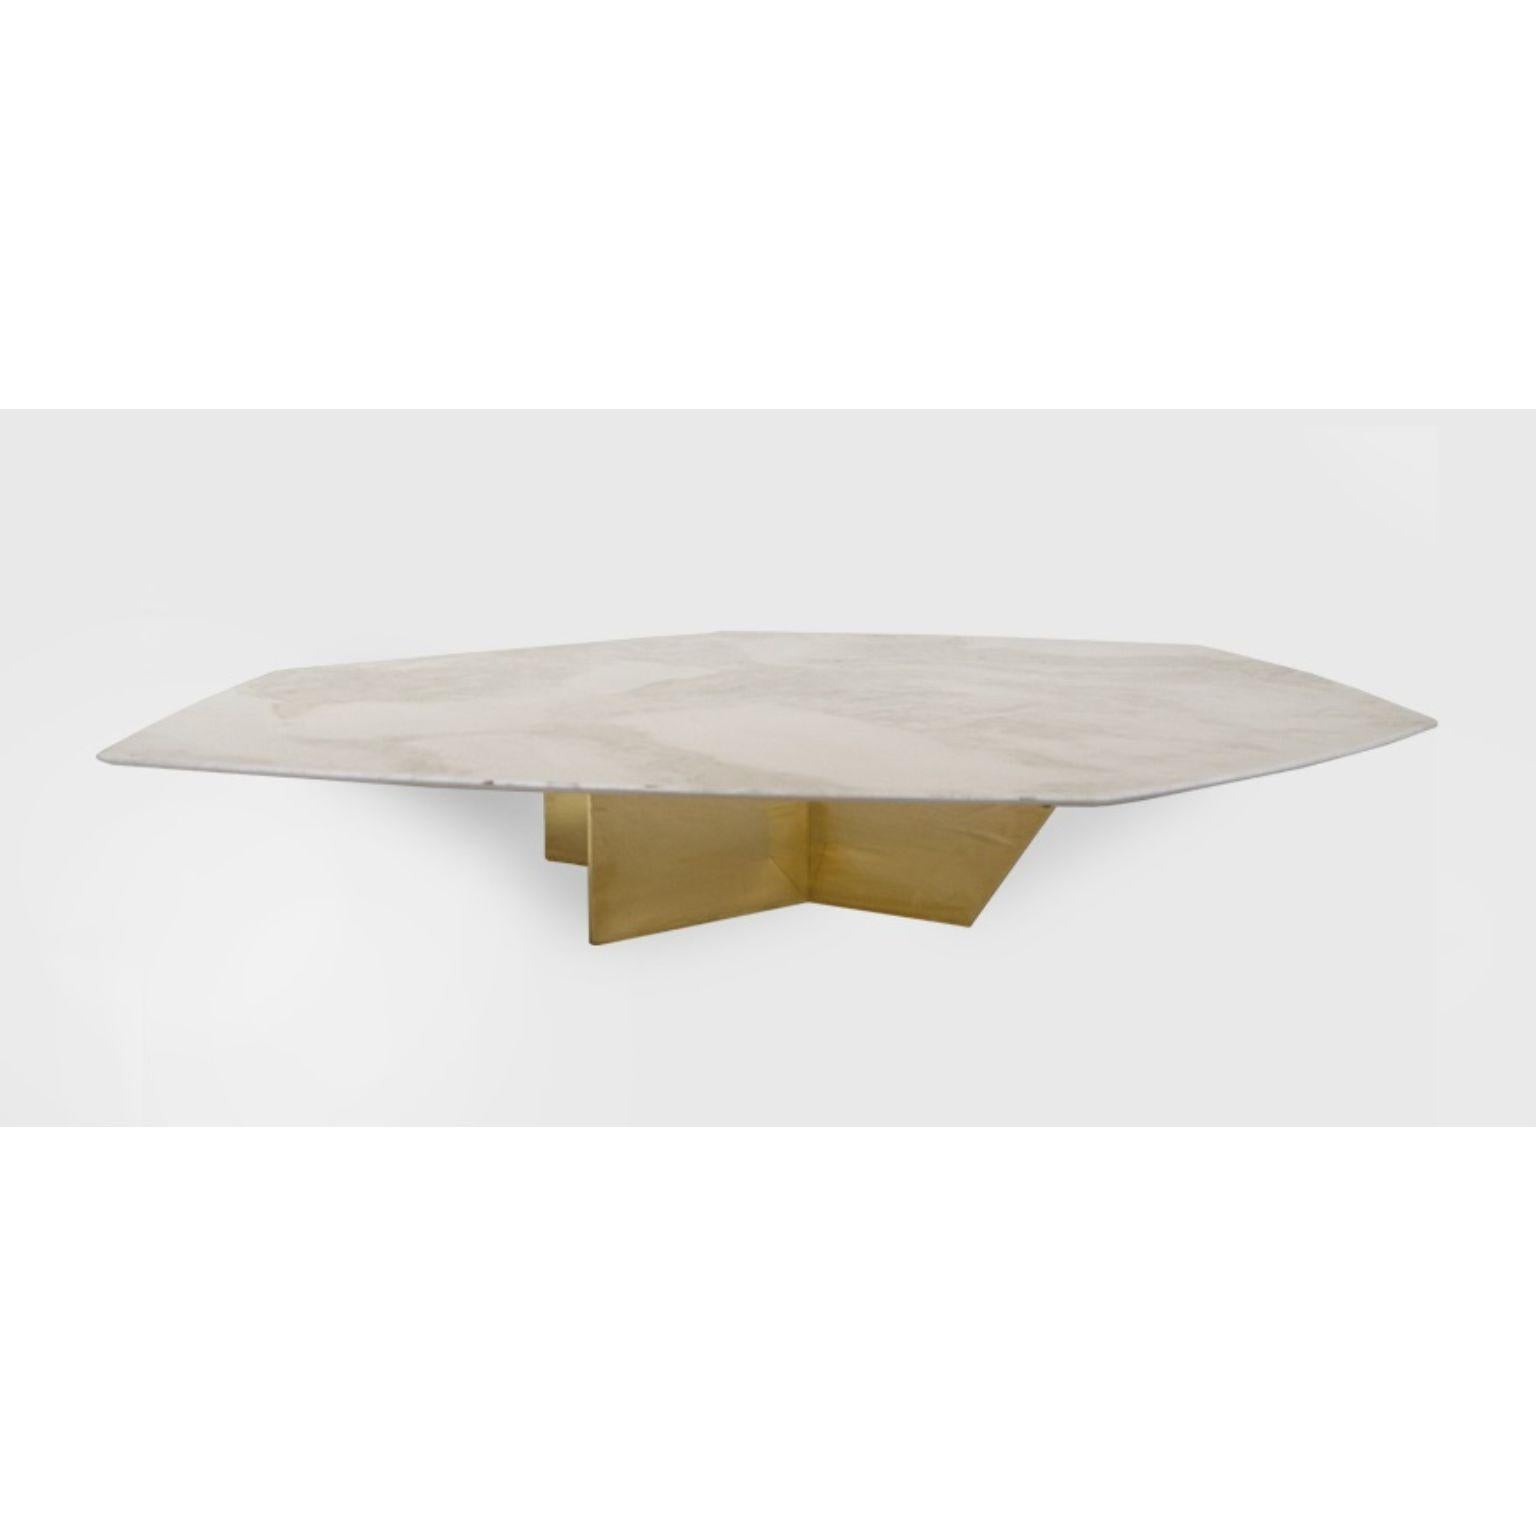 Geometrik Cristallo Stone and Brass Large Coffee Table by Atra Design
Dimensions: D 120 x W 180 x H 32 cm.
Materials: Cristallo stone stone and brass.

Available in three sizes. Different marble options available: Verde Tikal, Negro Monterrey,